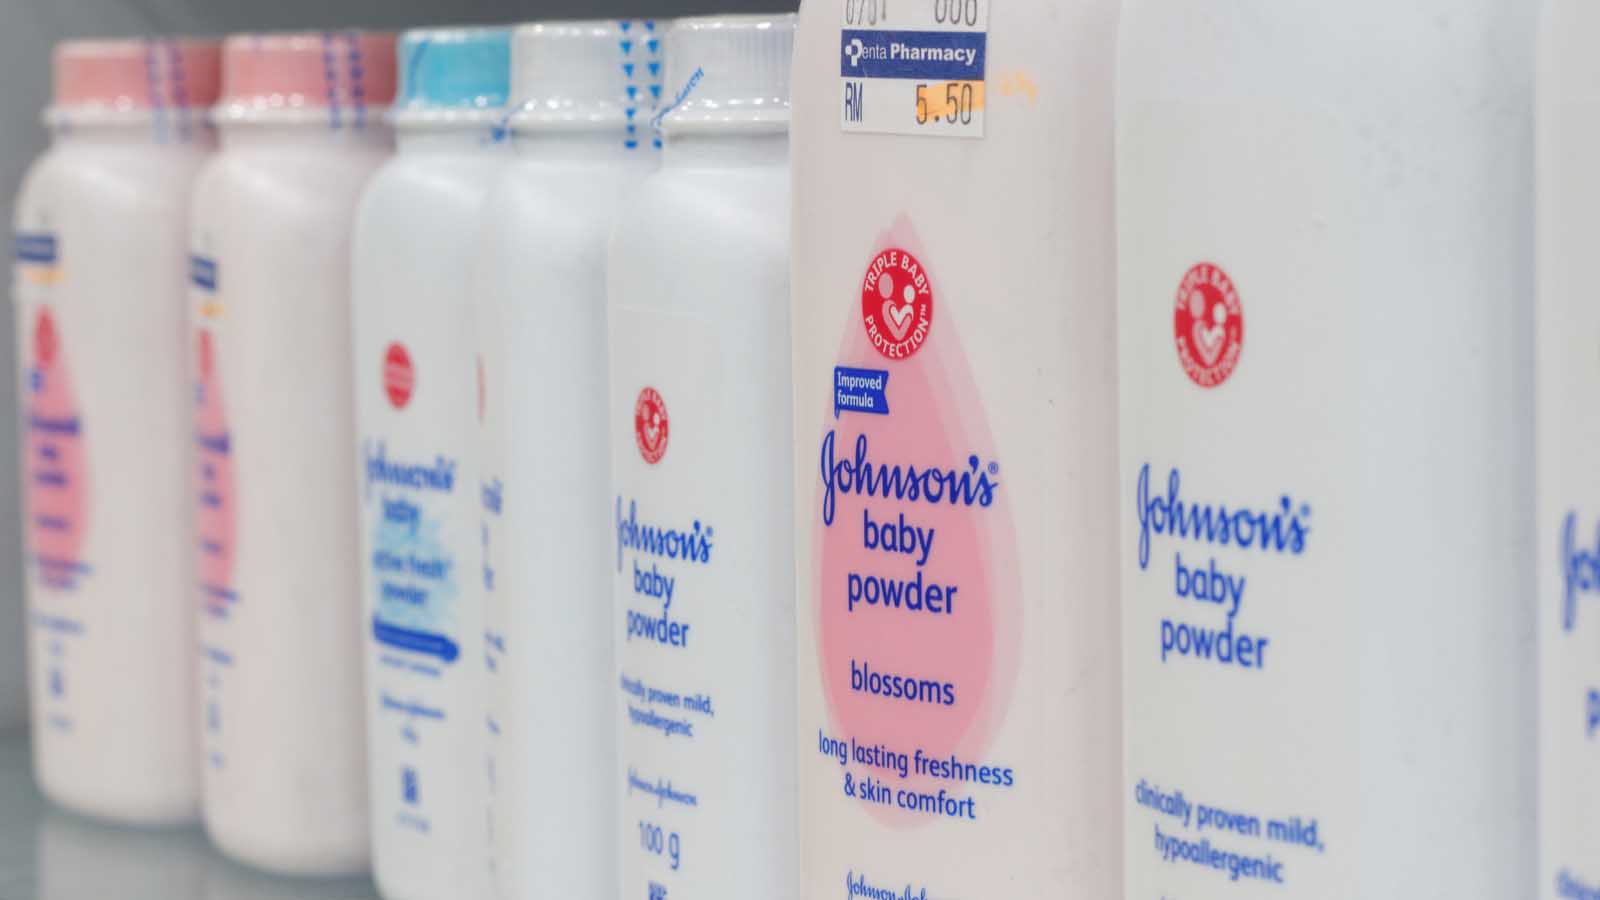 Can Johnson and Johnson Survive this Latest Controversy? | InvestorPlace